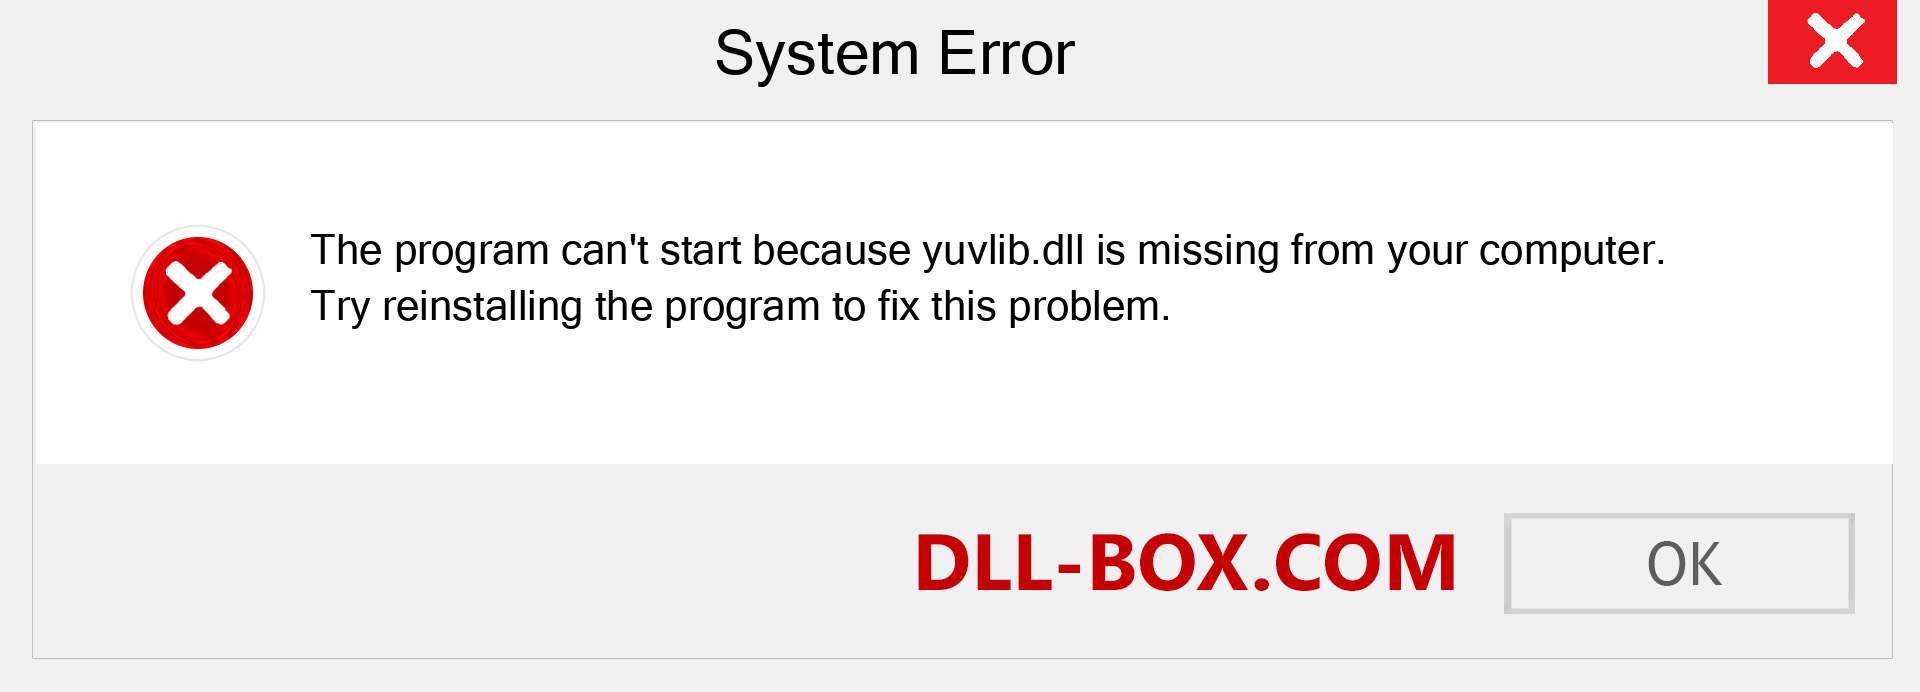  yuvlib.dll file is missing?. Download for Windows 7, 8, 10 - Fix  yuvlib dll Missing Error on Windows, photos, images